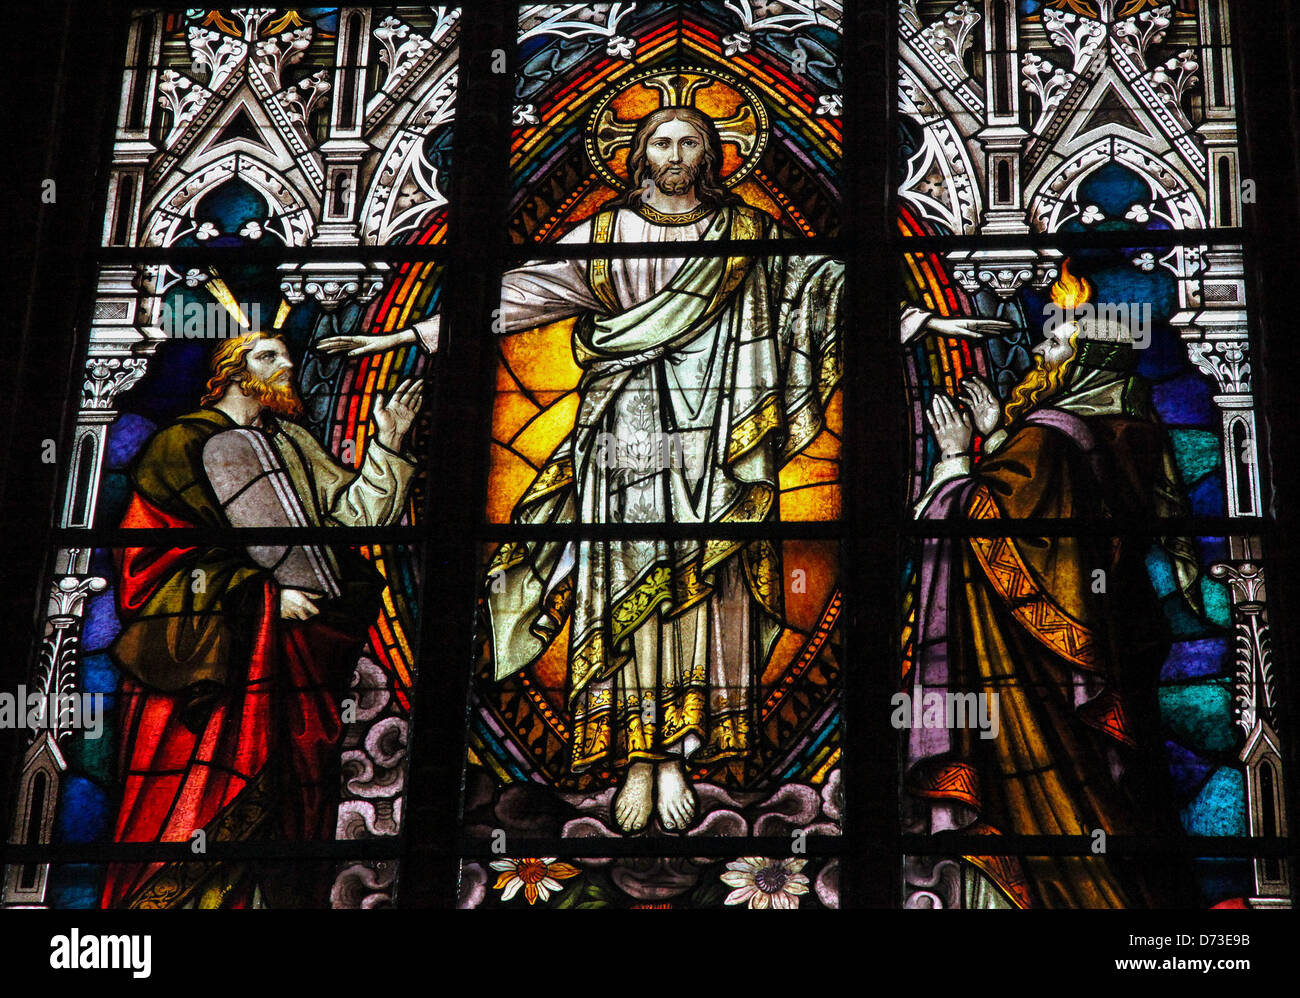 Stained glass window depicting Jesus Christ, Moses with the Ten Commandments and the Prophet Iesaiah. Stock Photo